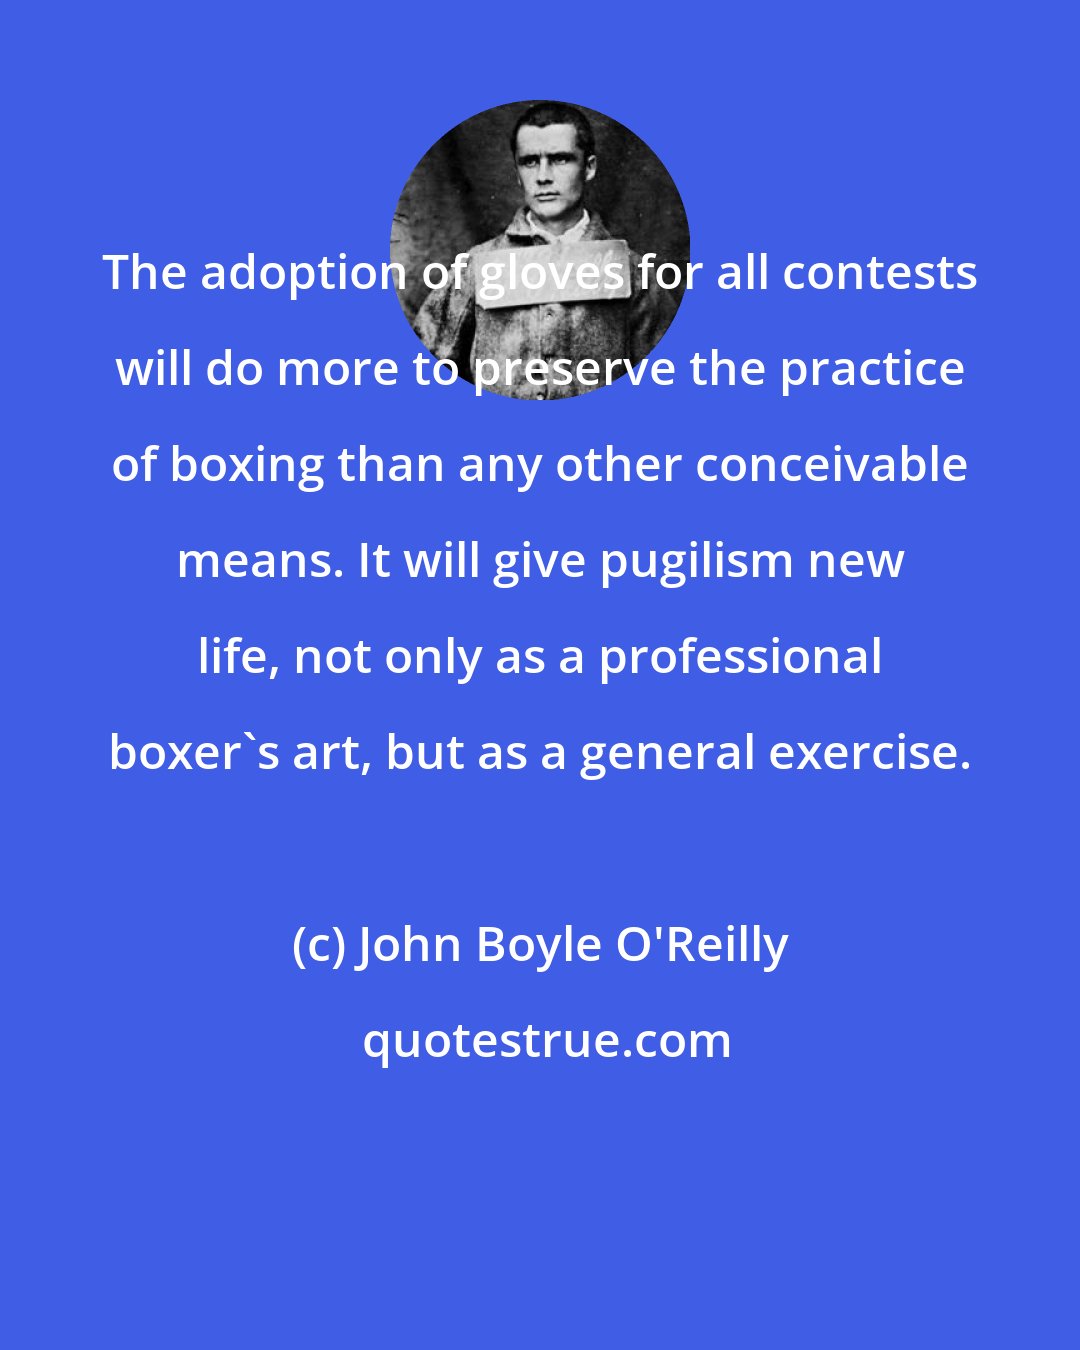 John Boyle O'Reilly: The adoption of gloves for all contests will do more to preserve the practice of boxing than any other conceivable means. It will give pugilism new life, not only as a professional boxer's art, but as a general exercise.